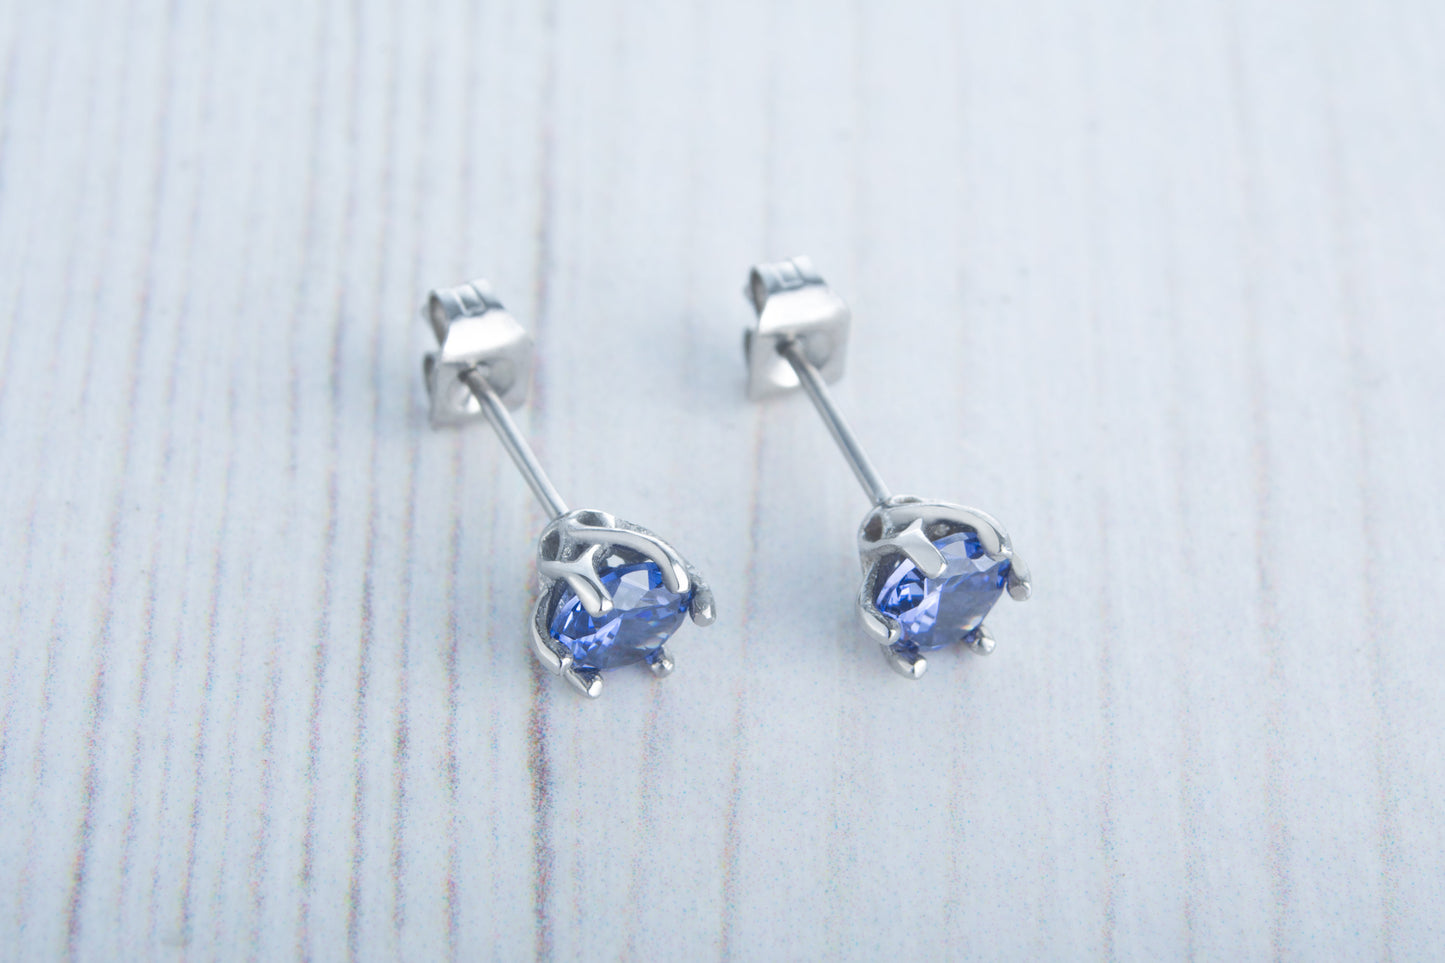 Genuine London Blue Topaz stud earrings, available in titanium, white gold and surgical steel 4mm, 5mm, 6mm sizes